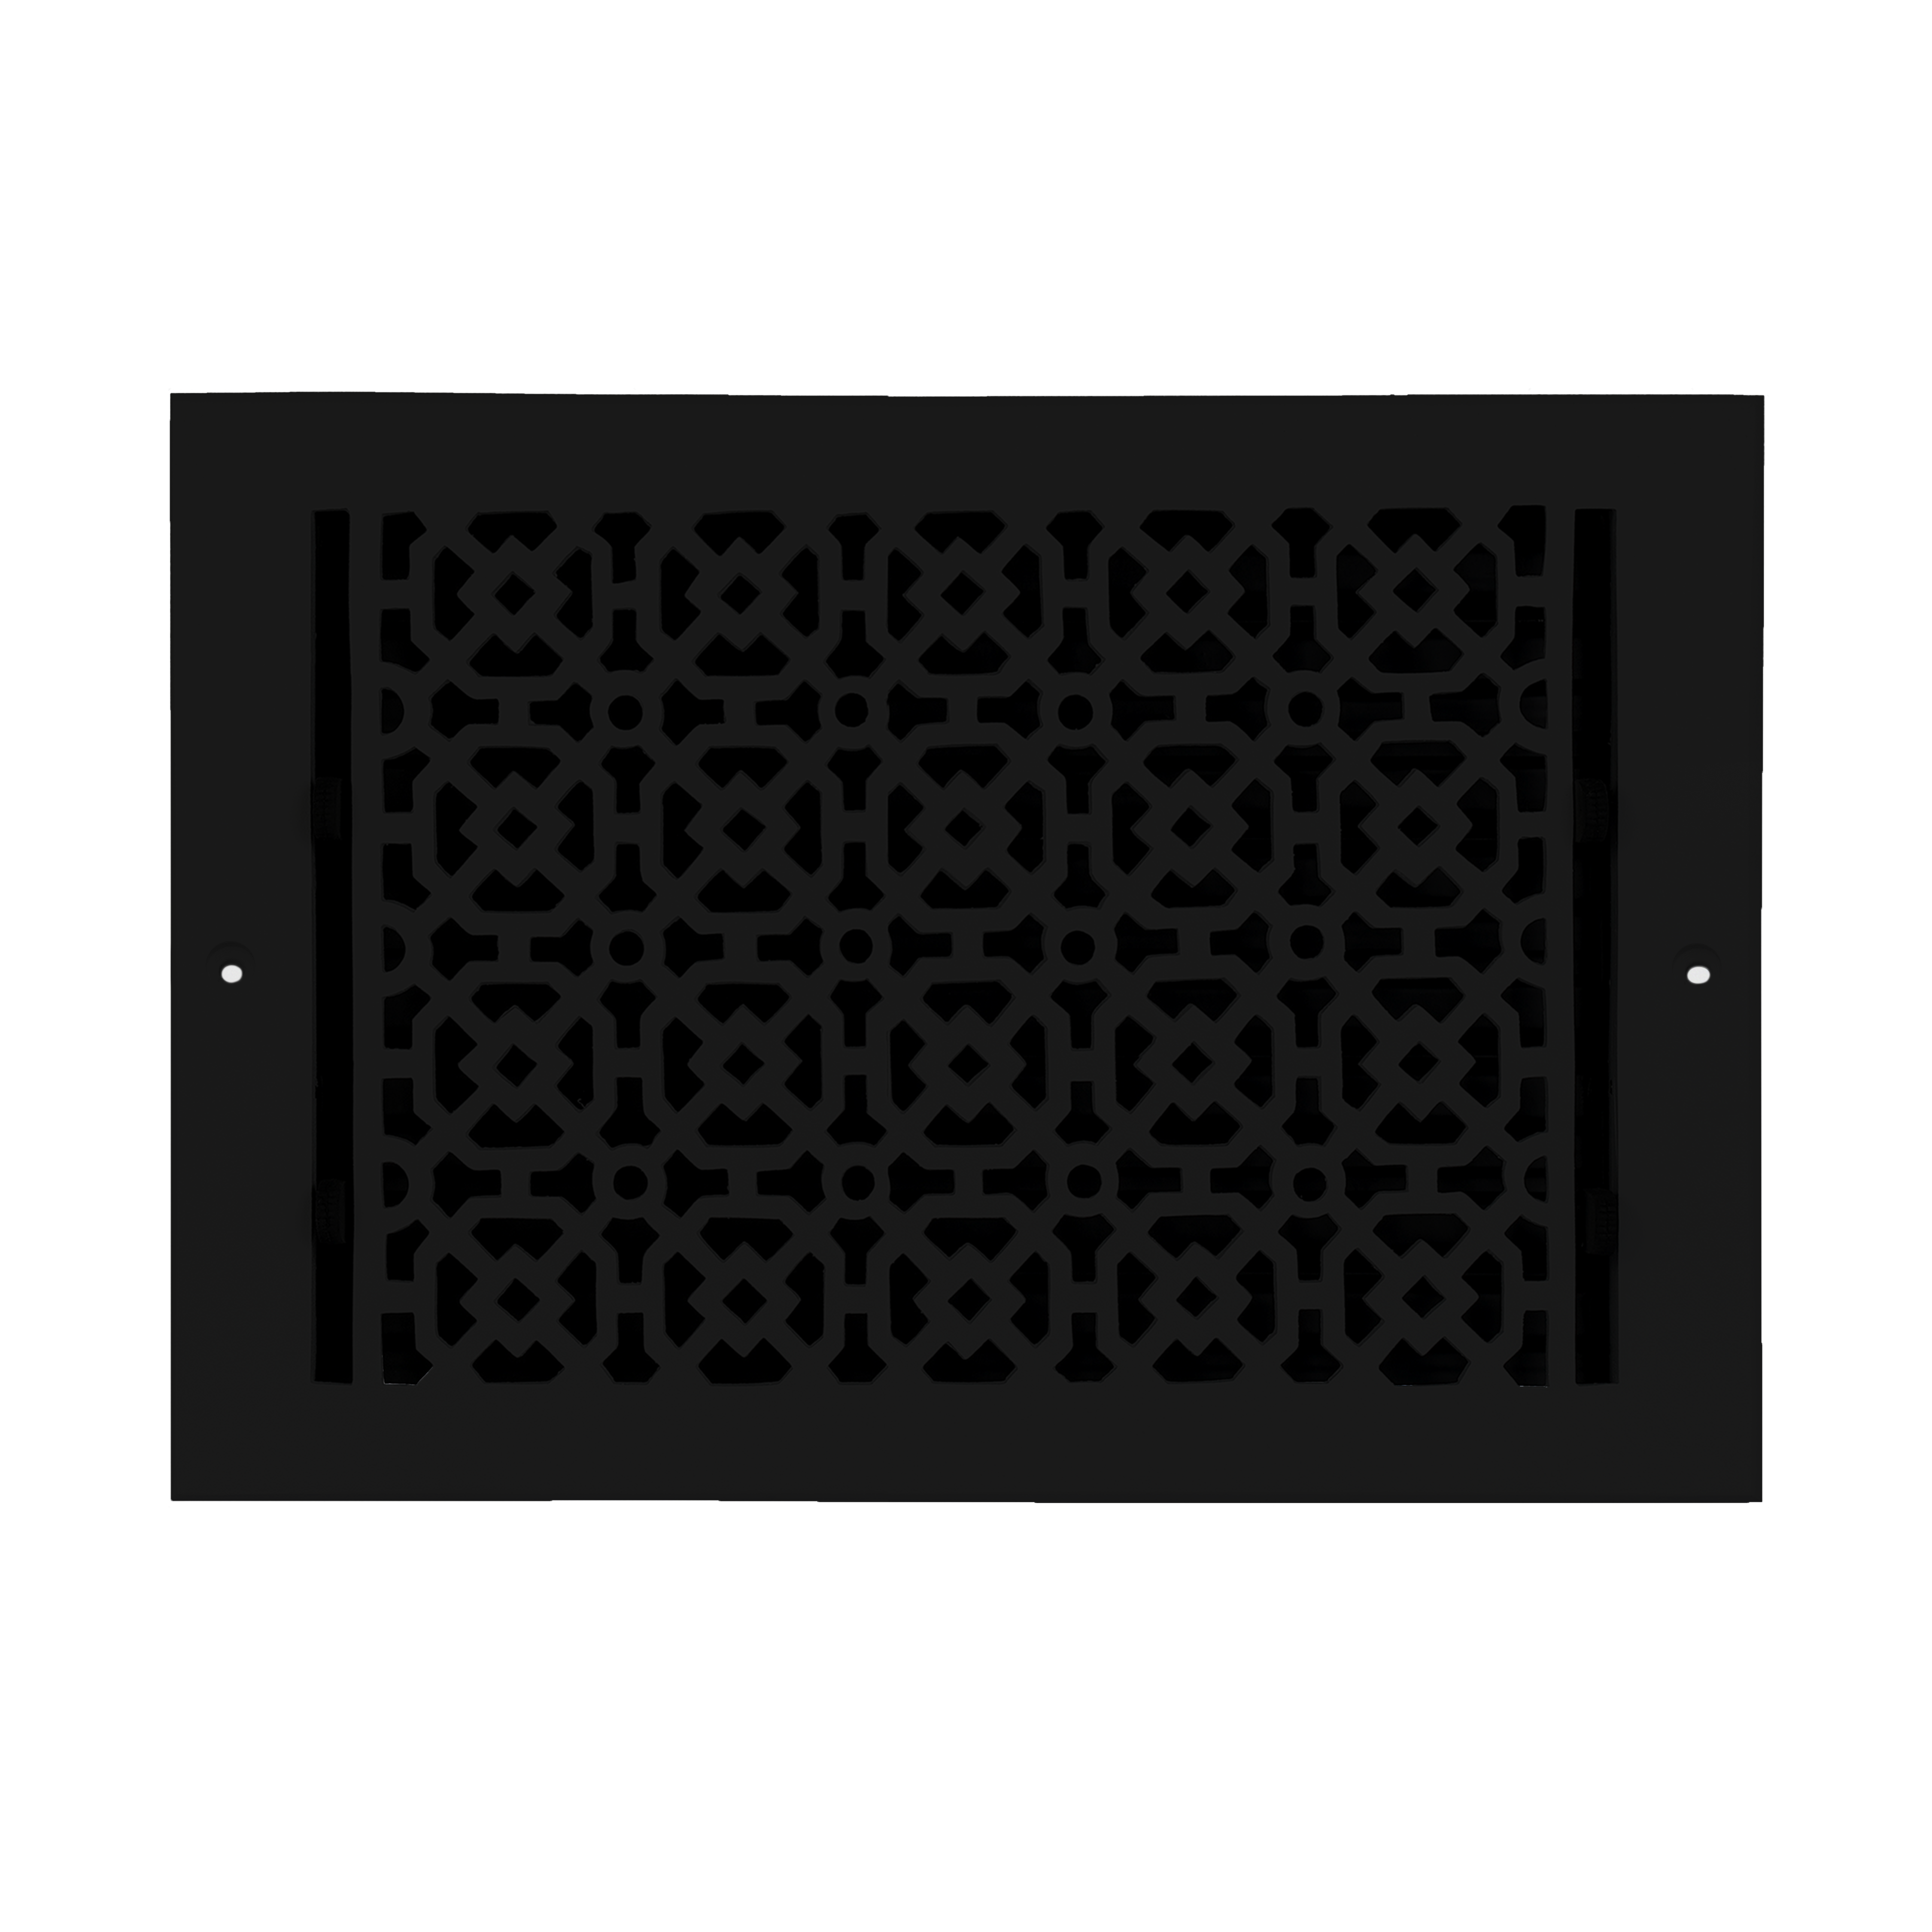 Achtek Air Supply Vent 8"x 12" Duct Opening (Overall 9-1/2"x 13-1/2") Solid Cast Aluminium Register Cover | Powder Coated